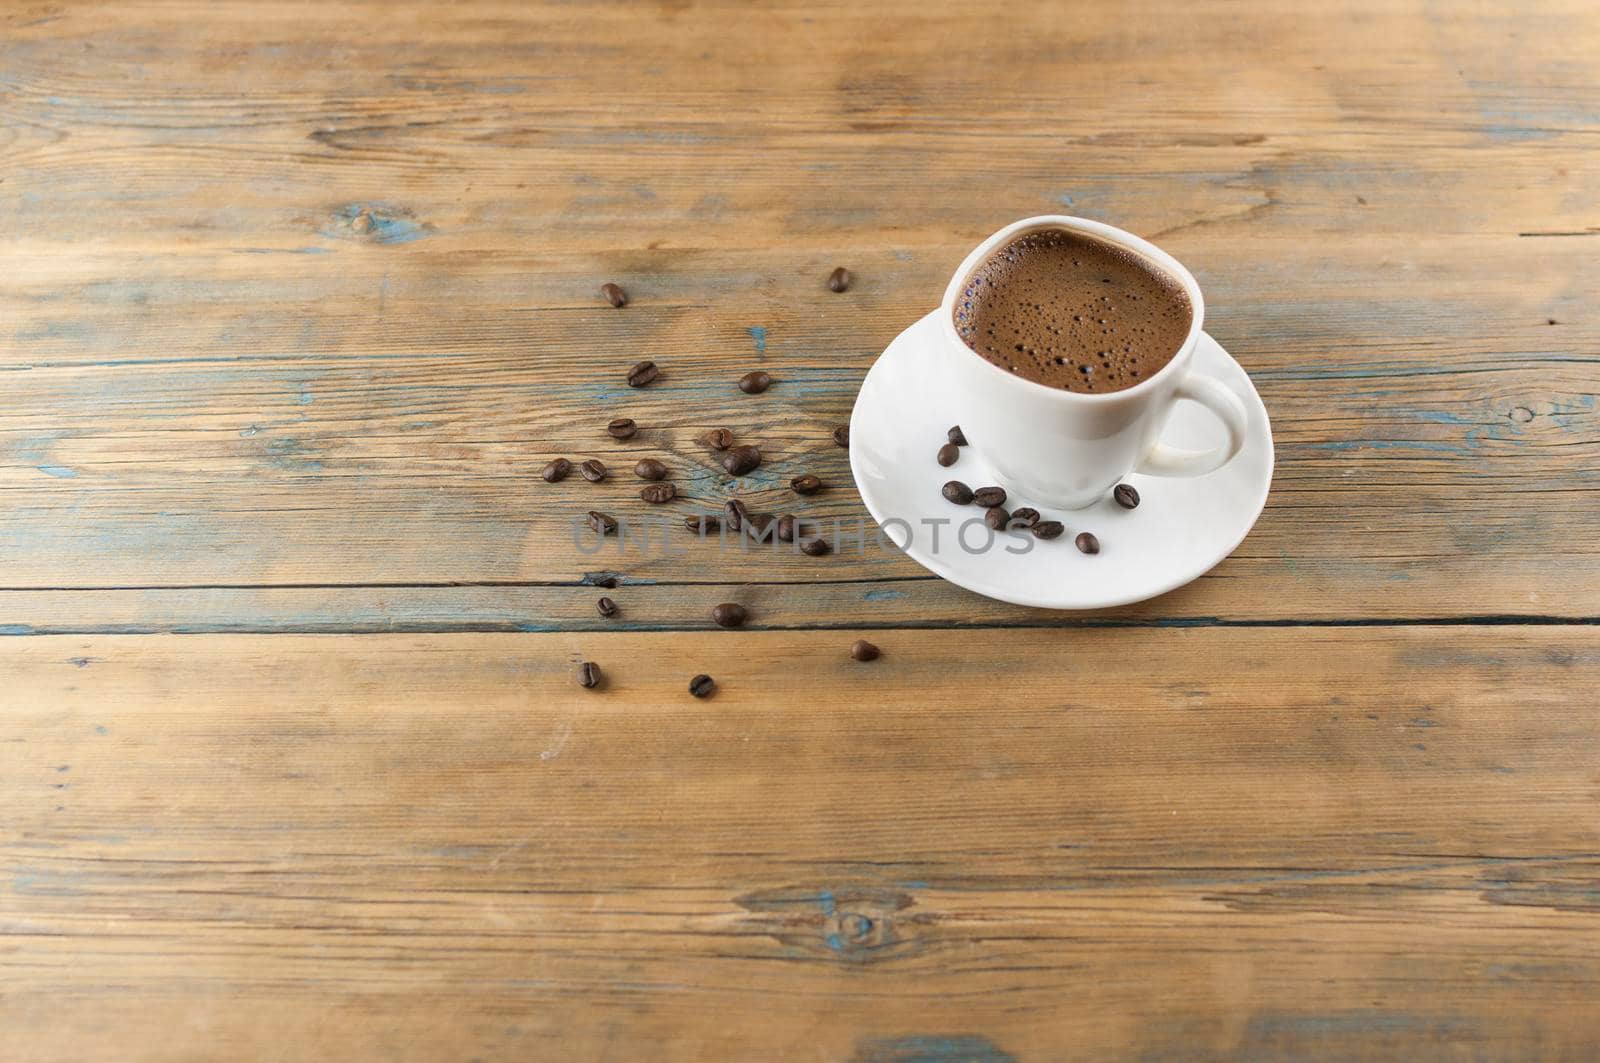 A cup of coffee on old wooden table with some roasted beans